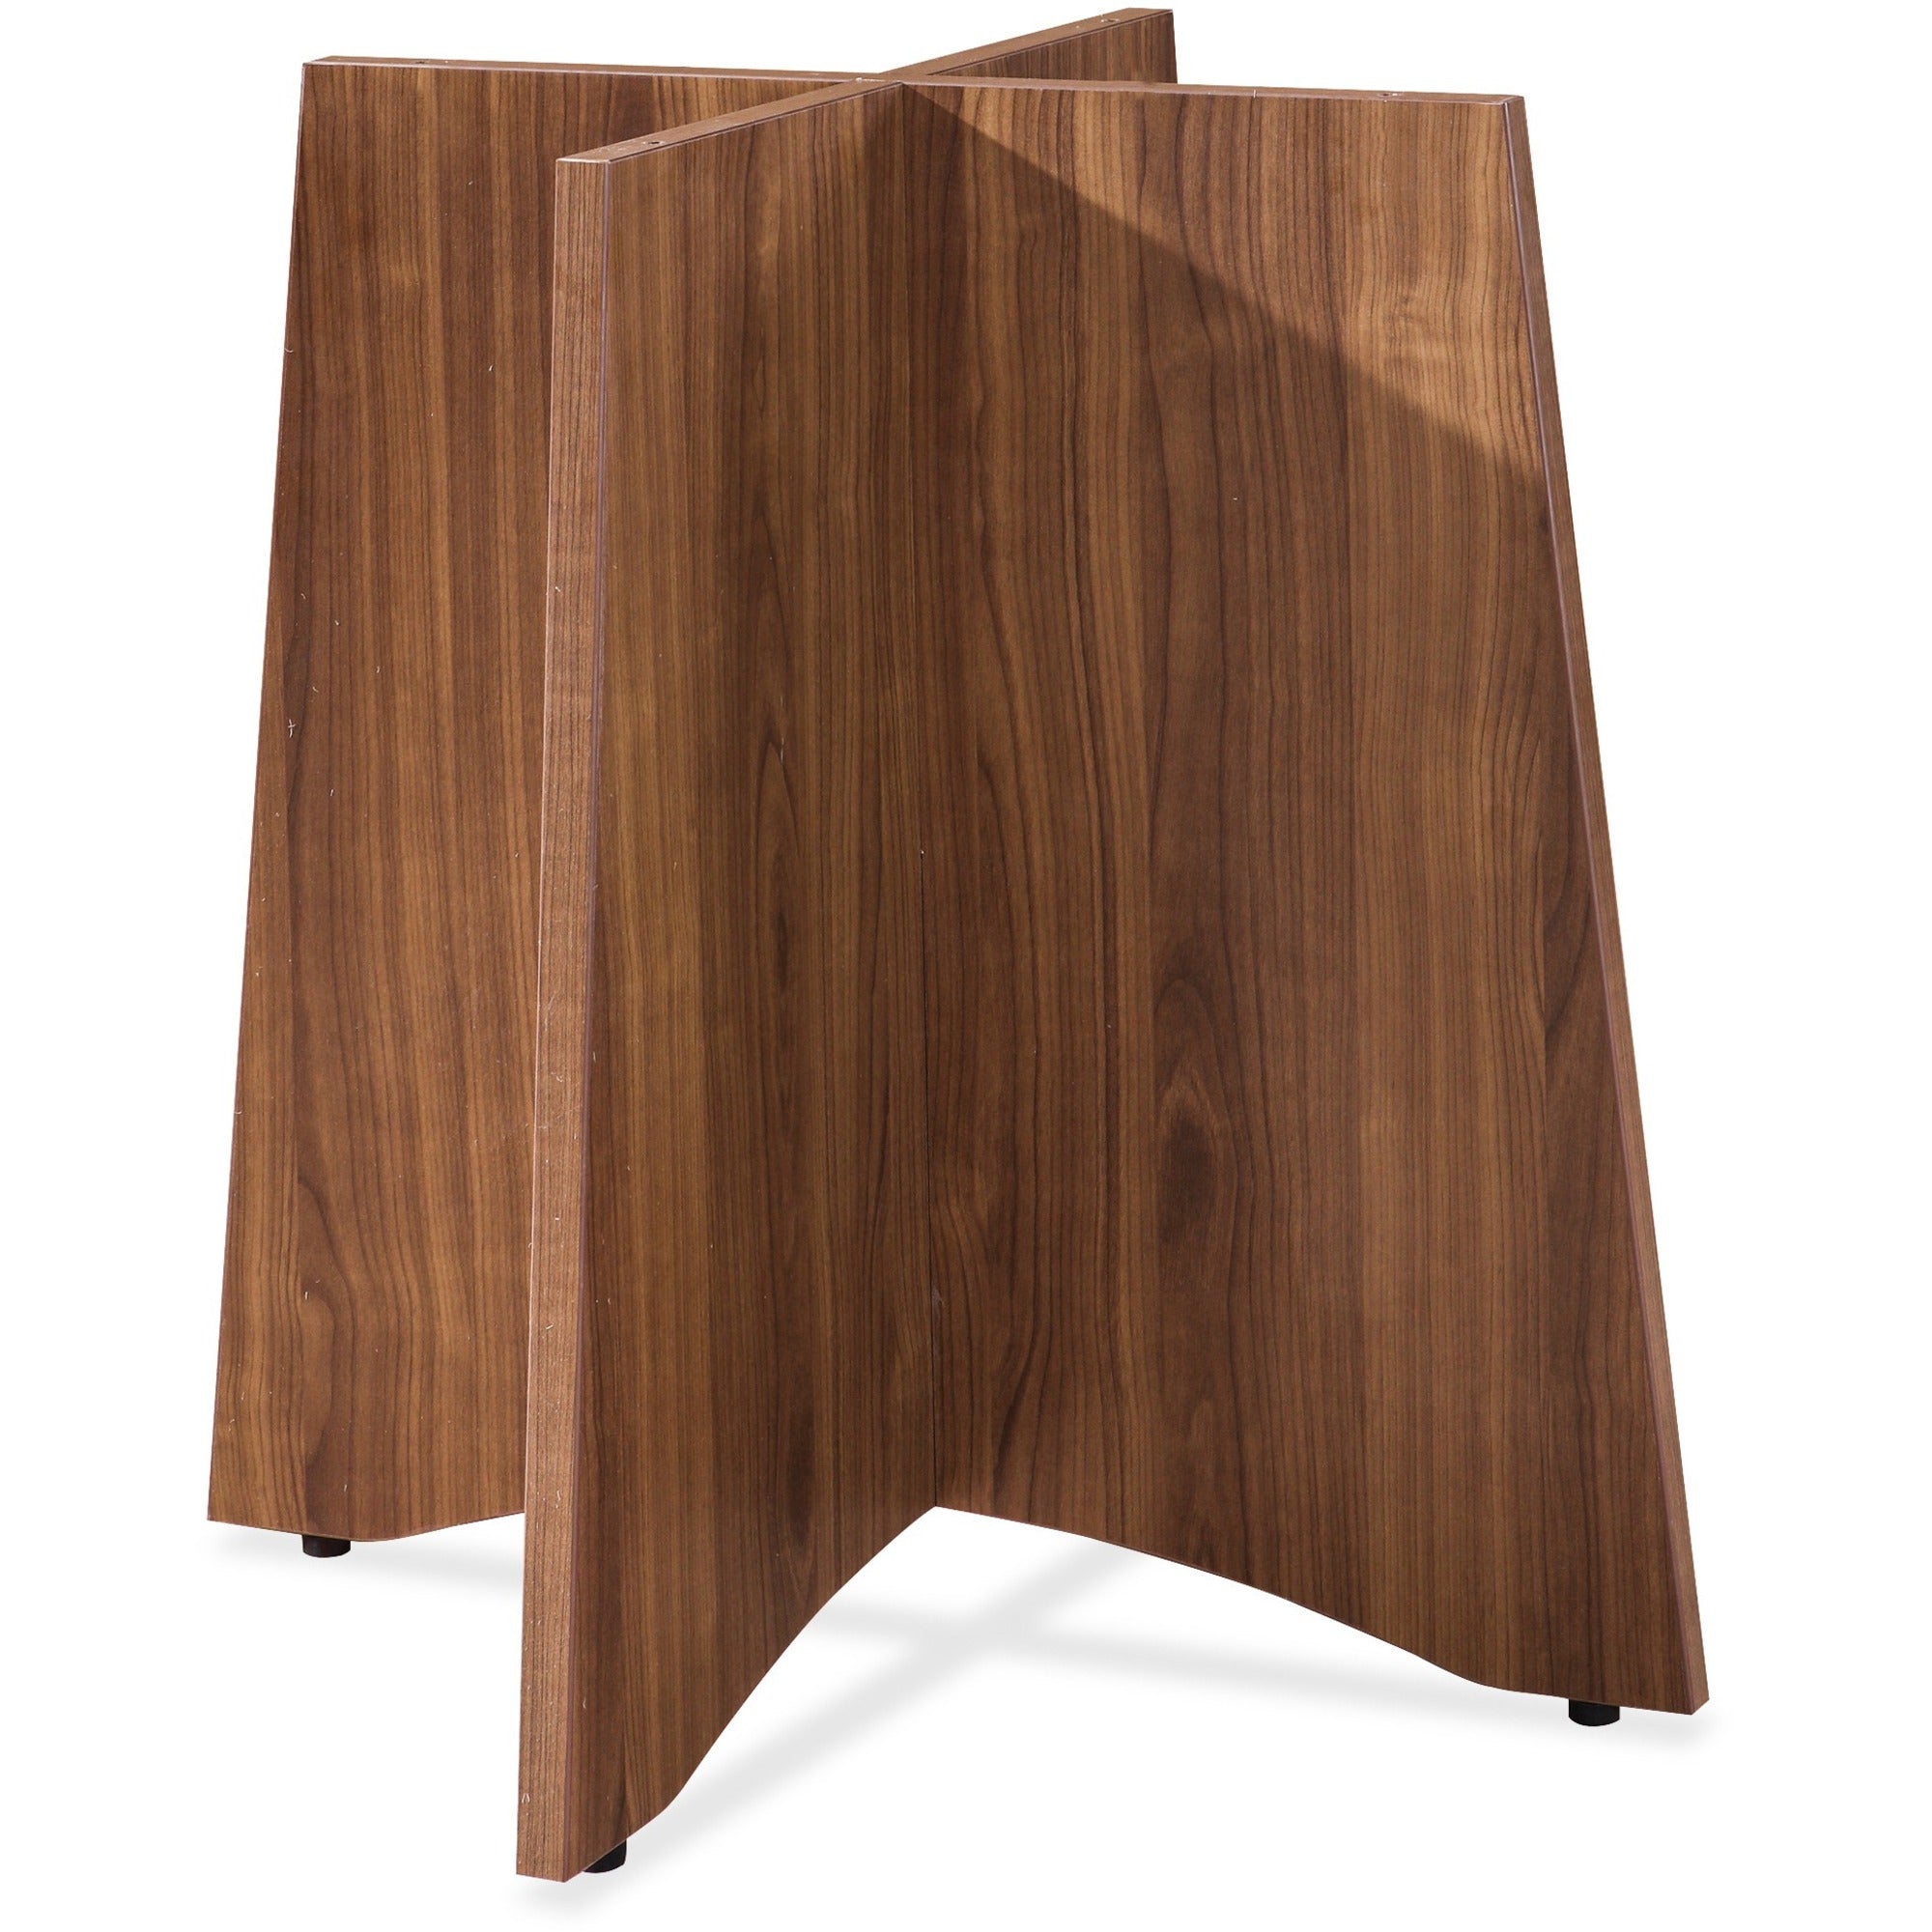 Lorell Essentials Round Conference Table Base - 24" x 24" x 29" - Material: Steel - Finish: Walnut - 